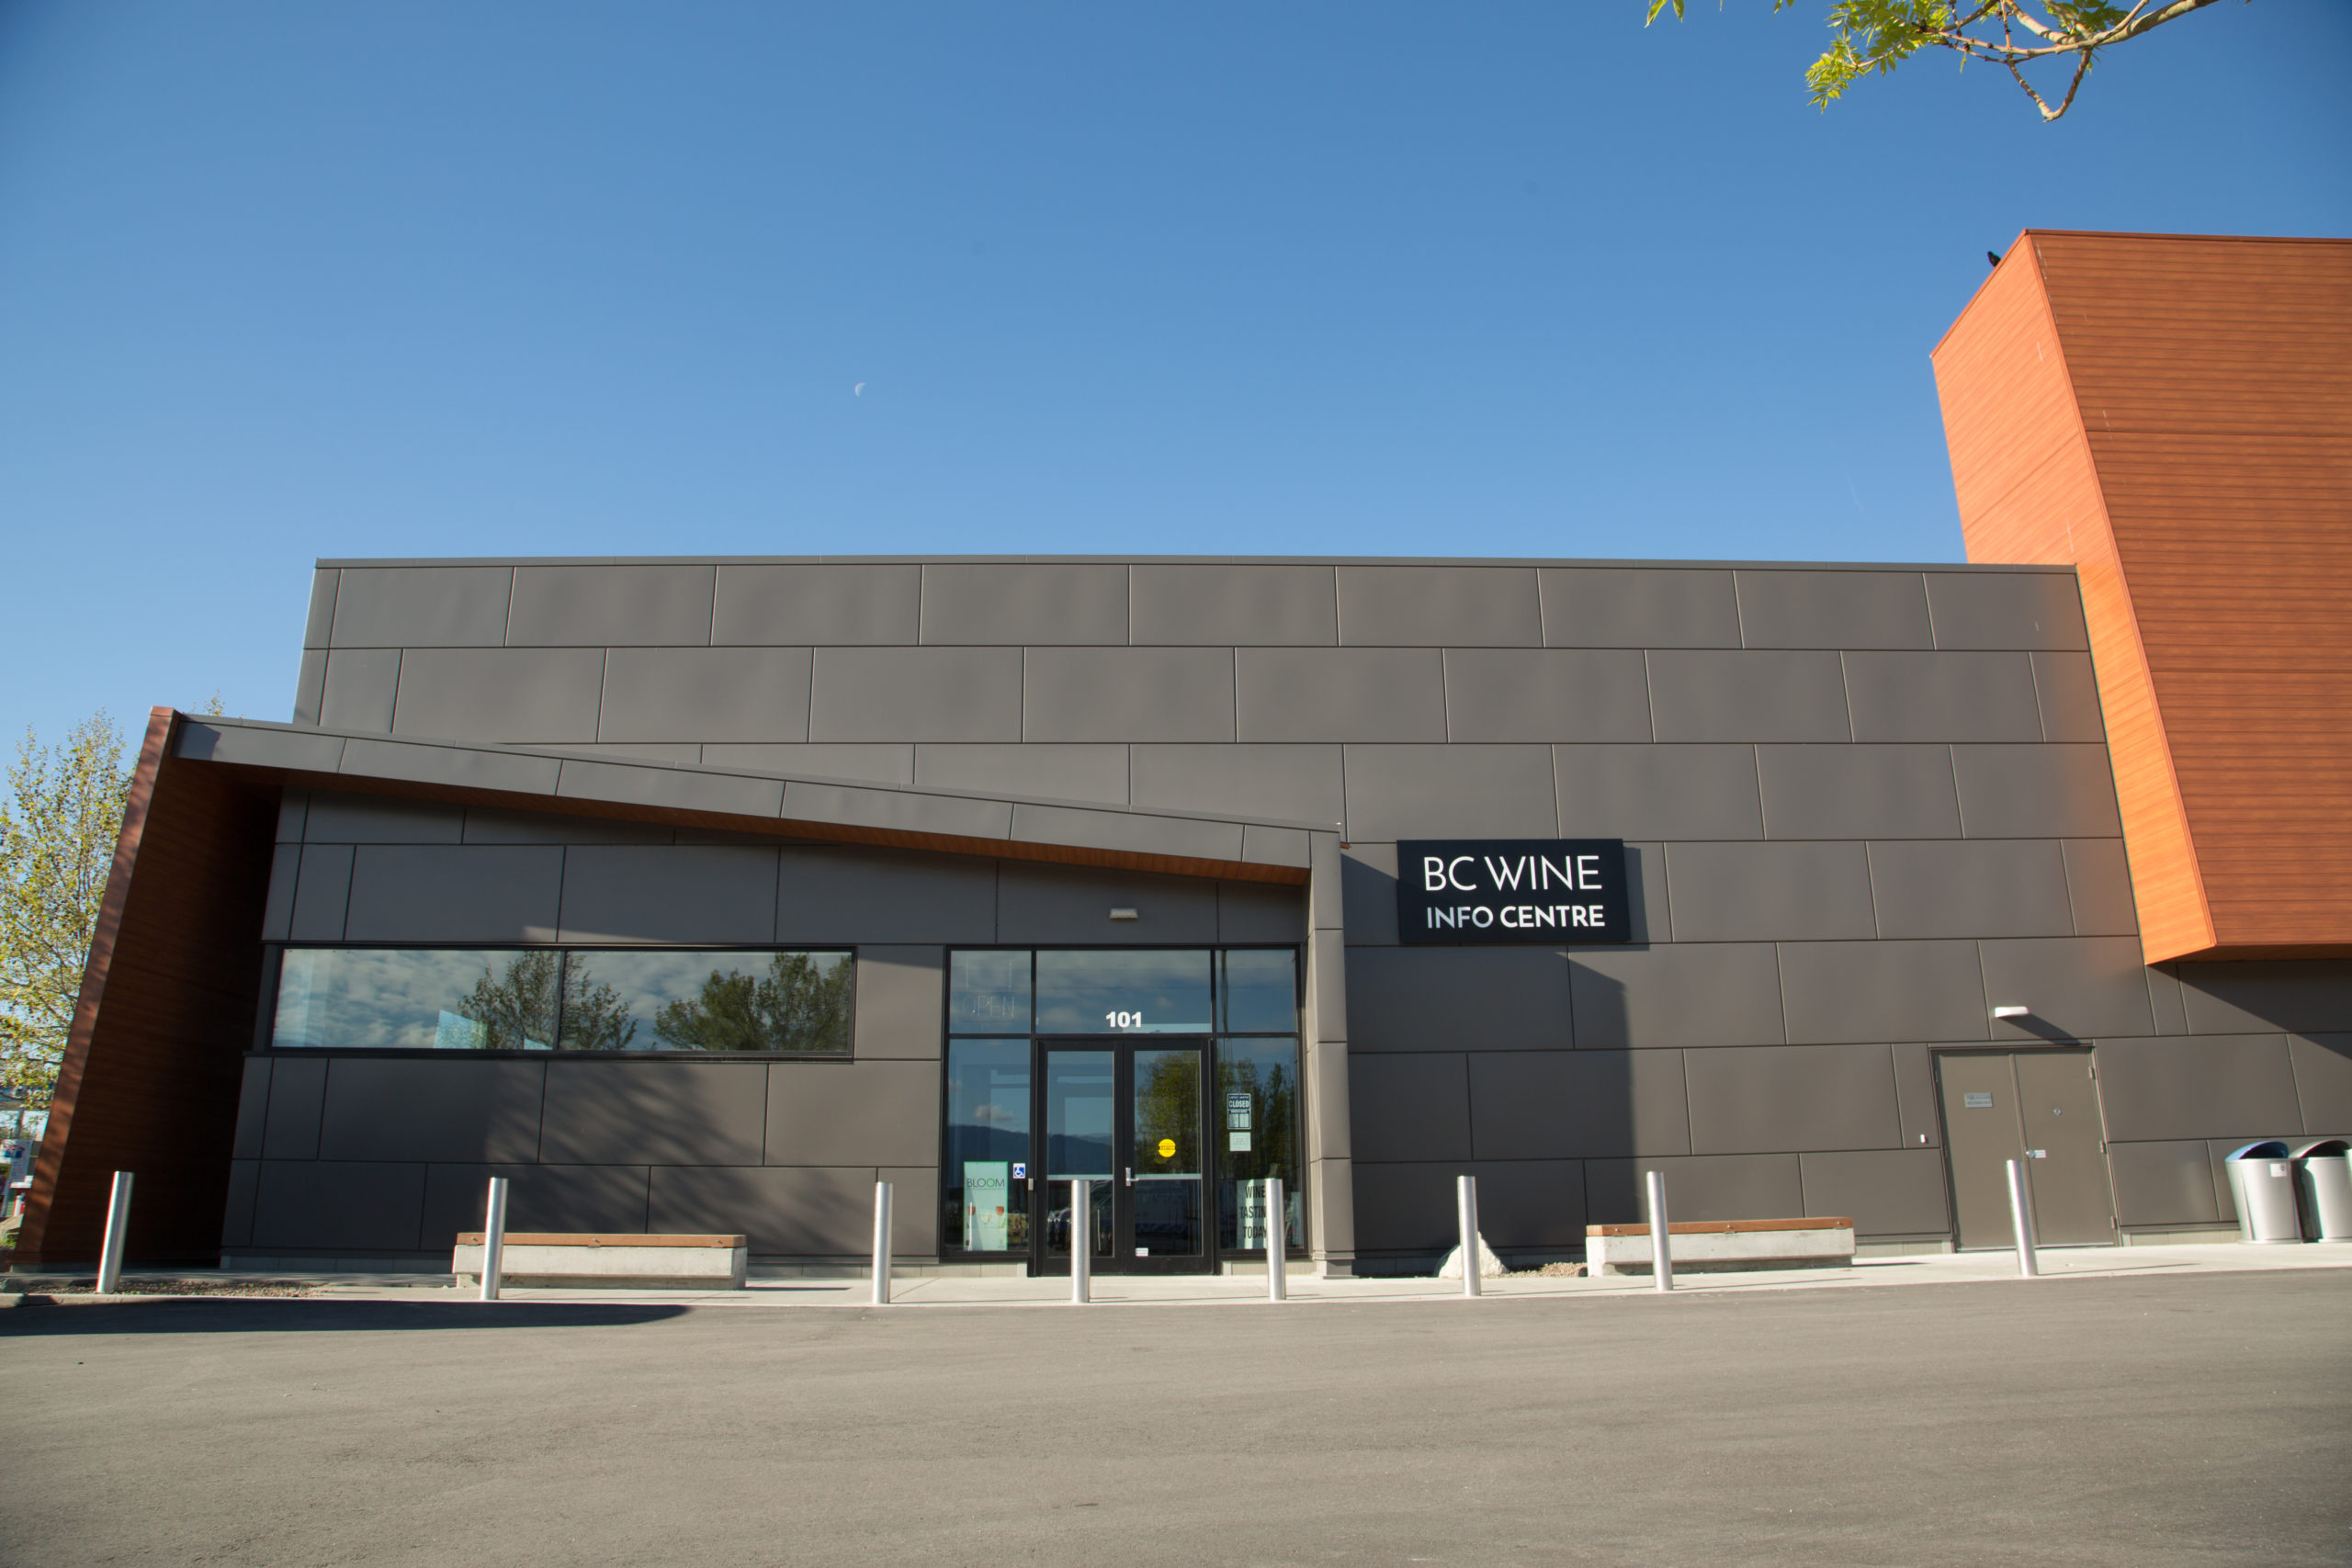 The BC Wine Information Centre